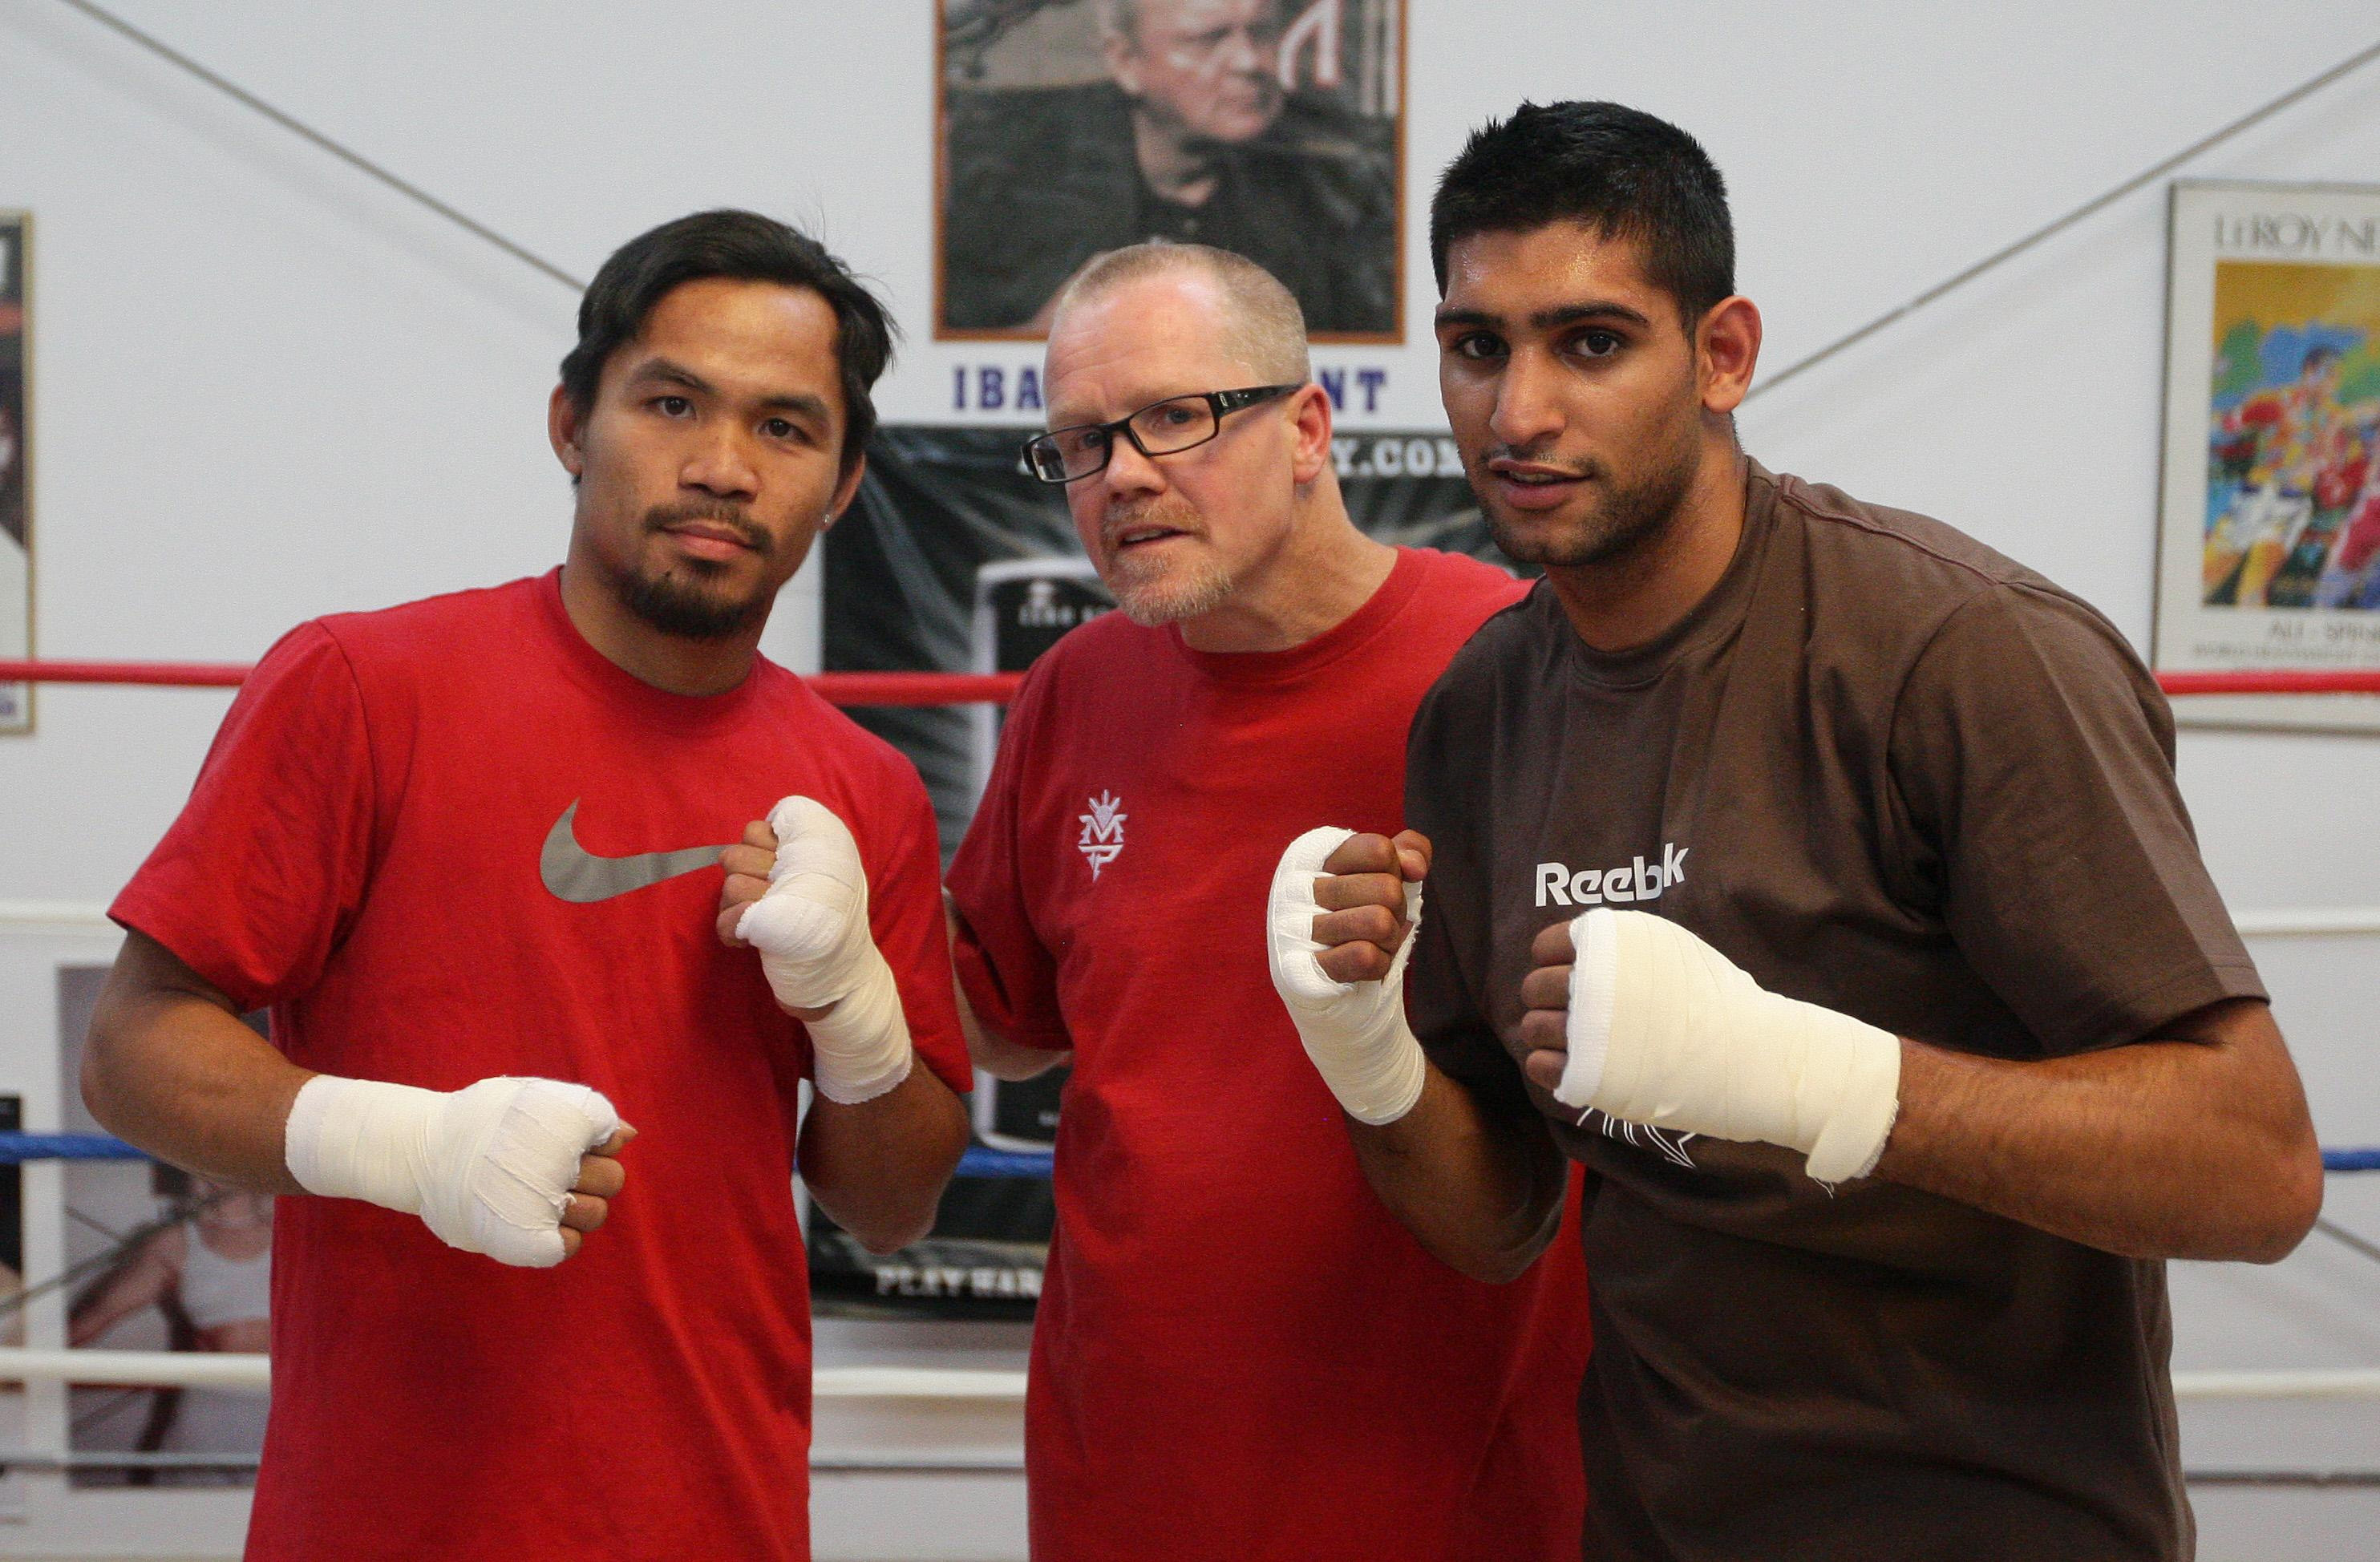 Pacquiao and Khan were former sparring partners at coach Freddie Roach's gym